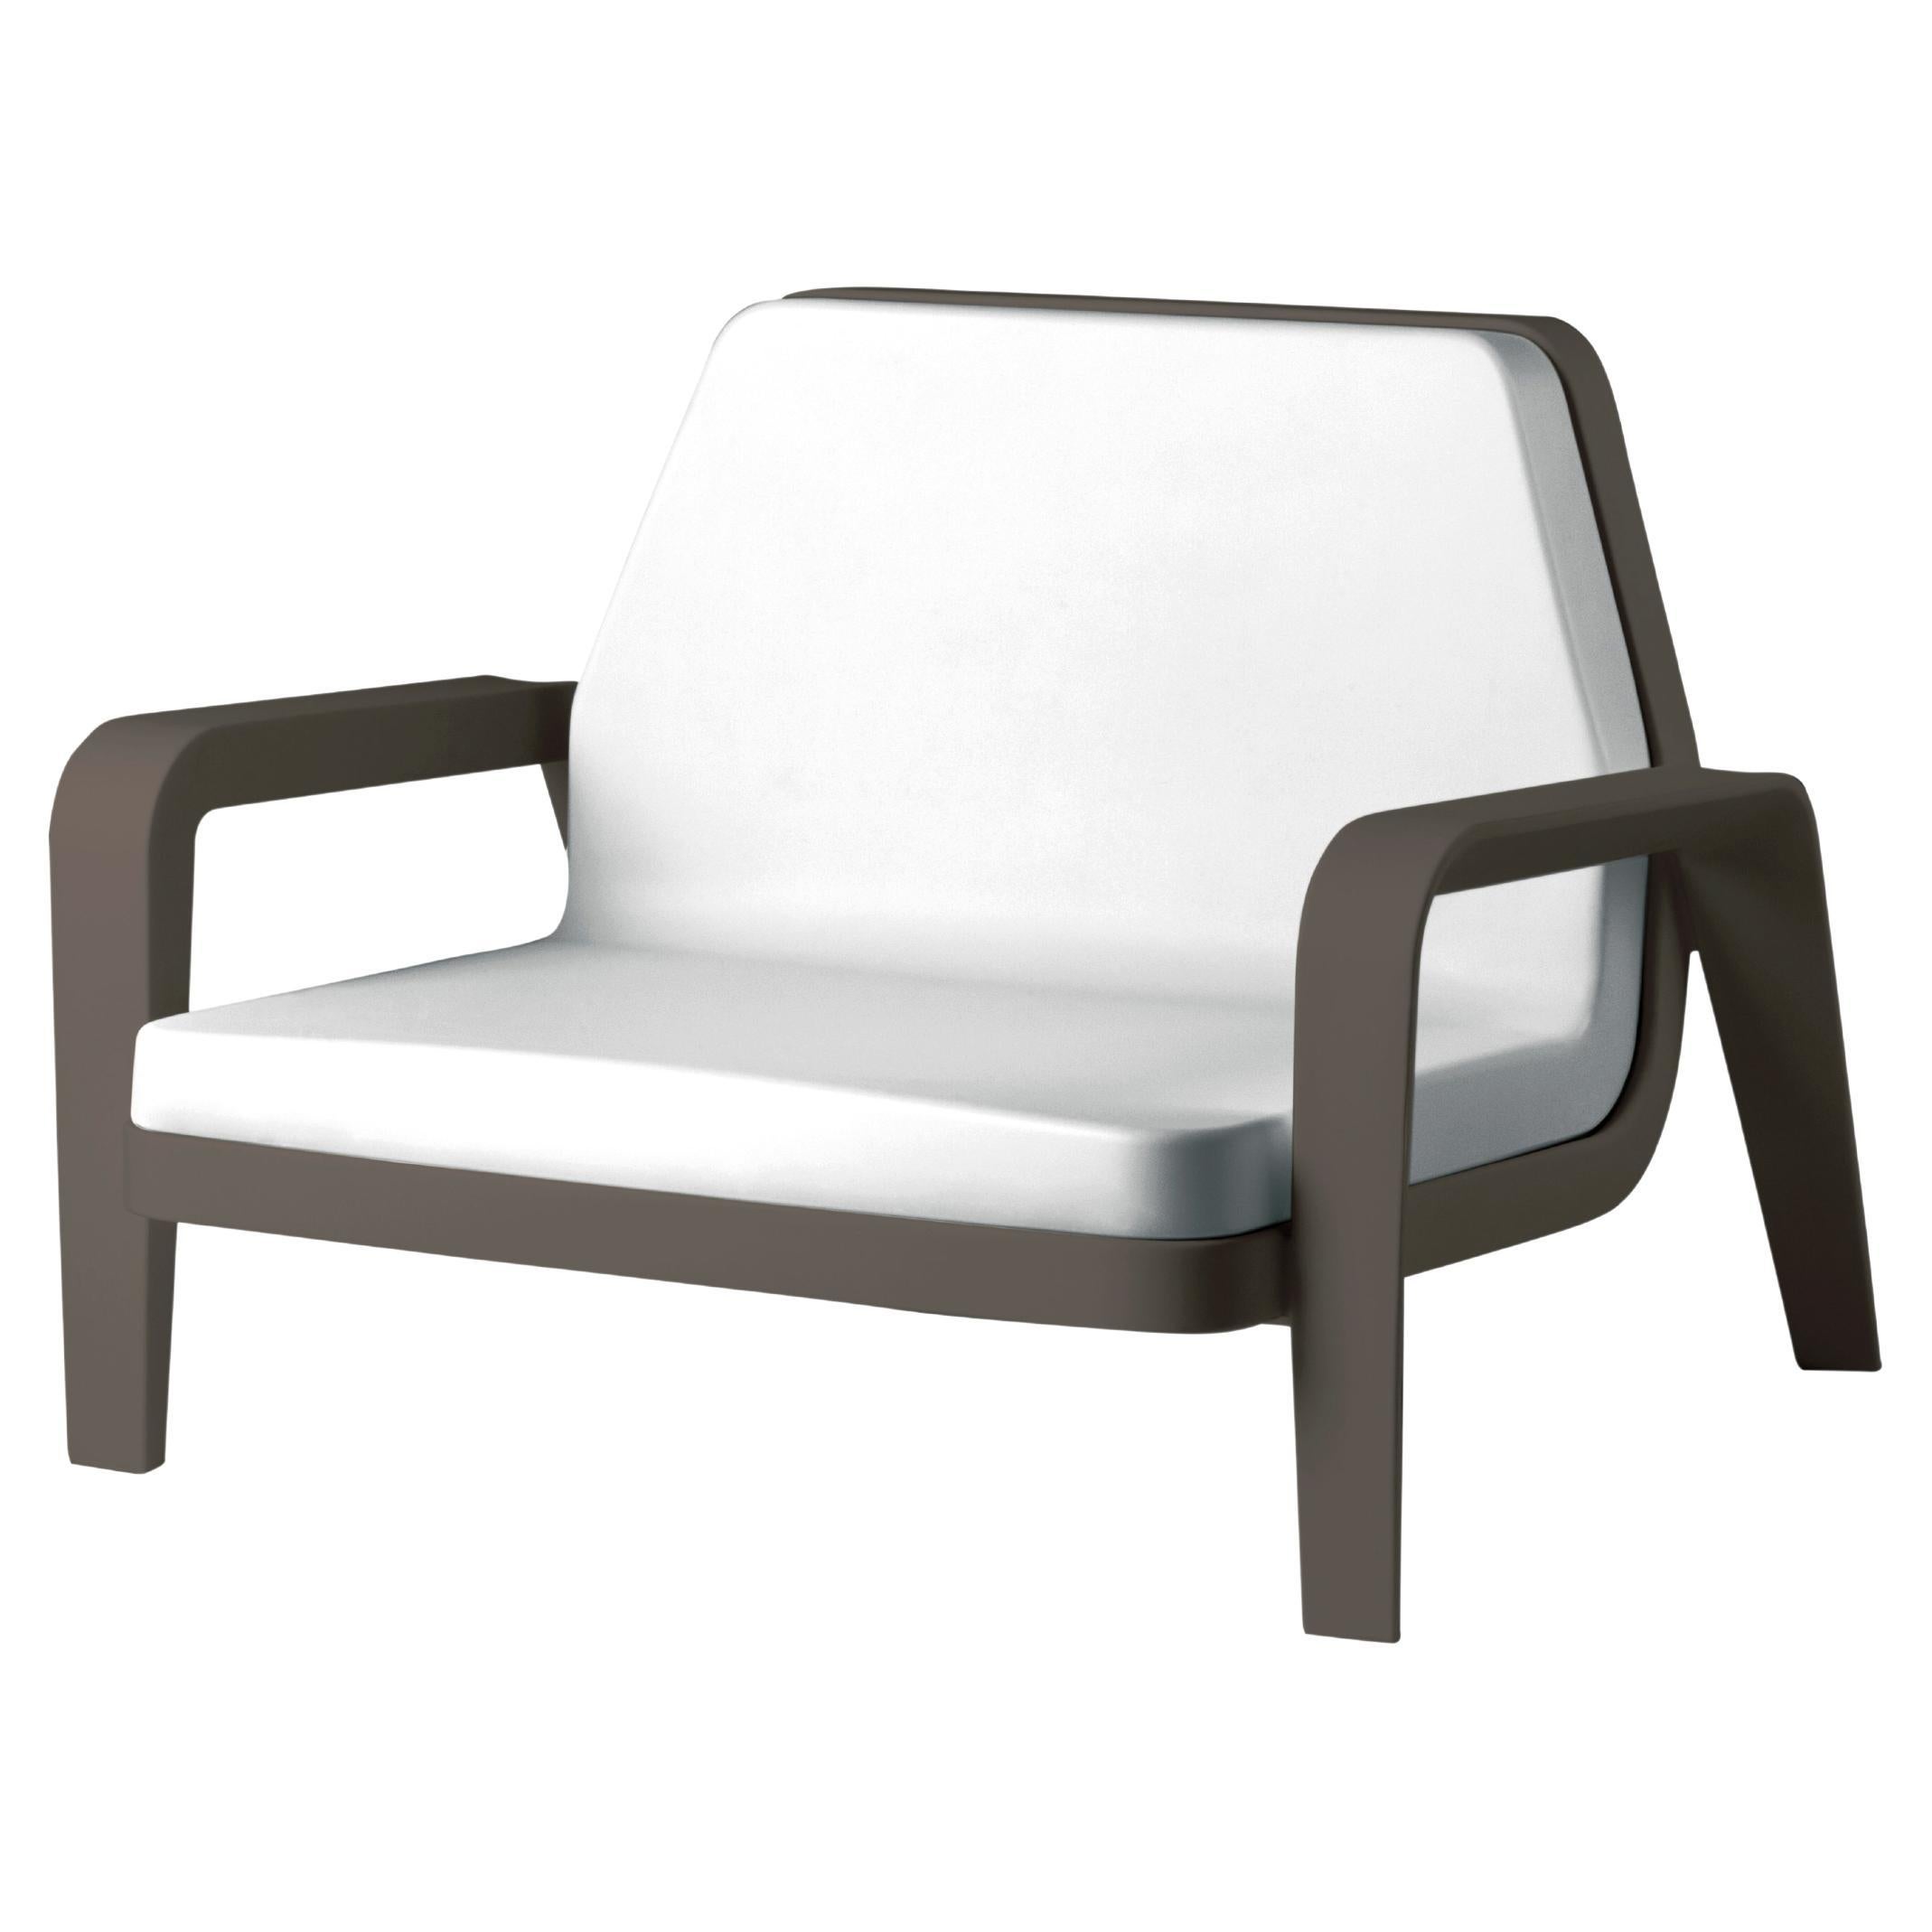 Slide Design America Armchair in Soft White Fabric with Chocolate Brown Frame